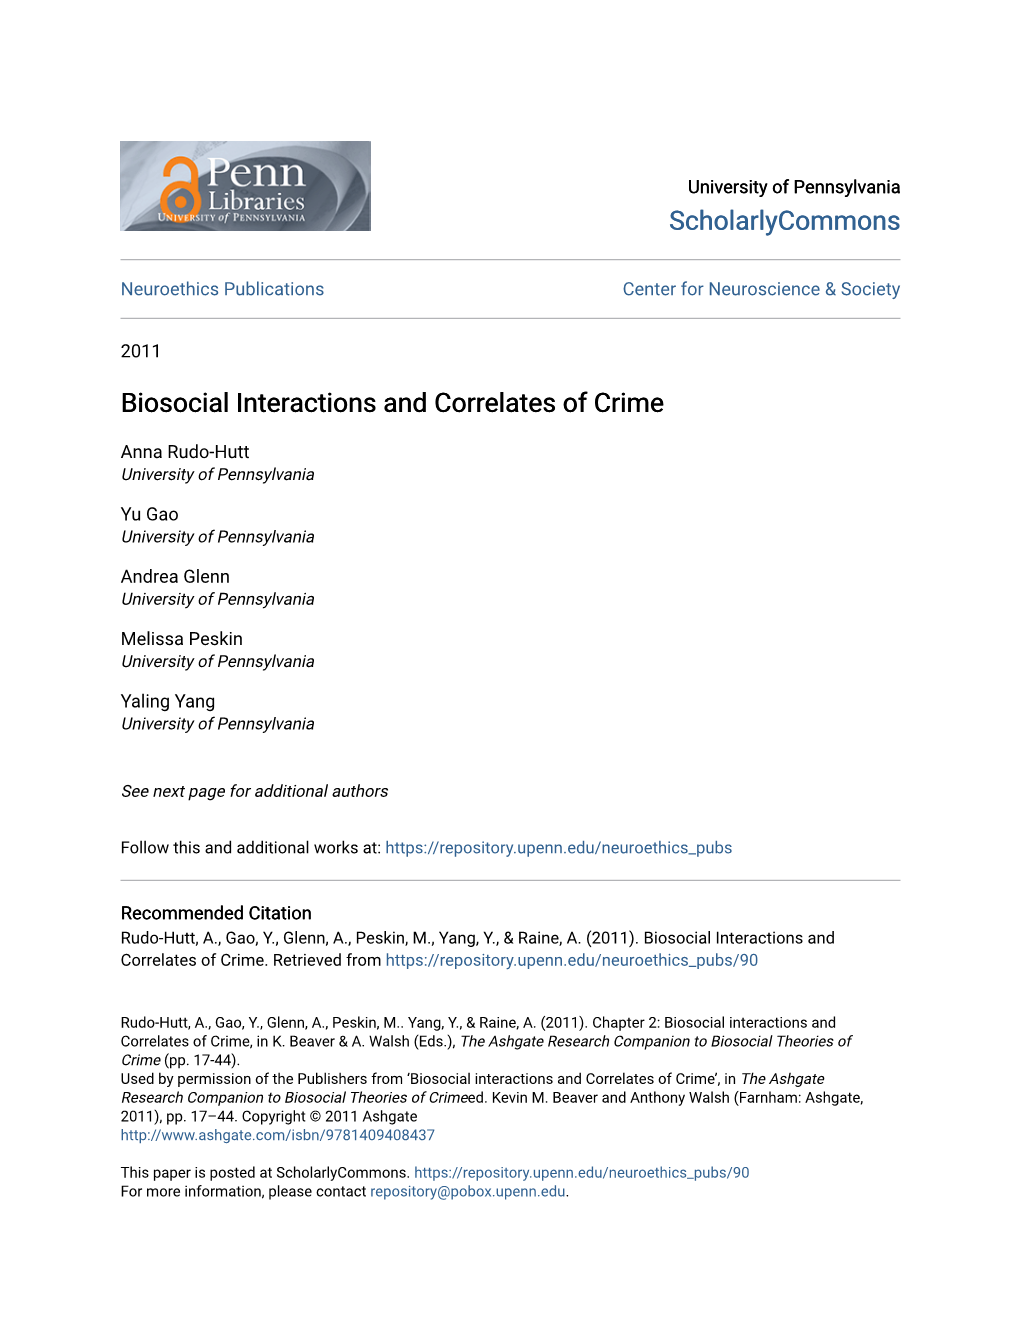 Biosocial Interactions and Correlates of Crime